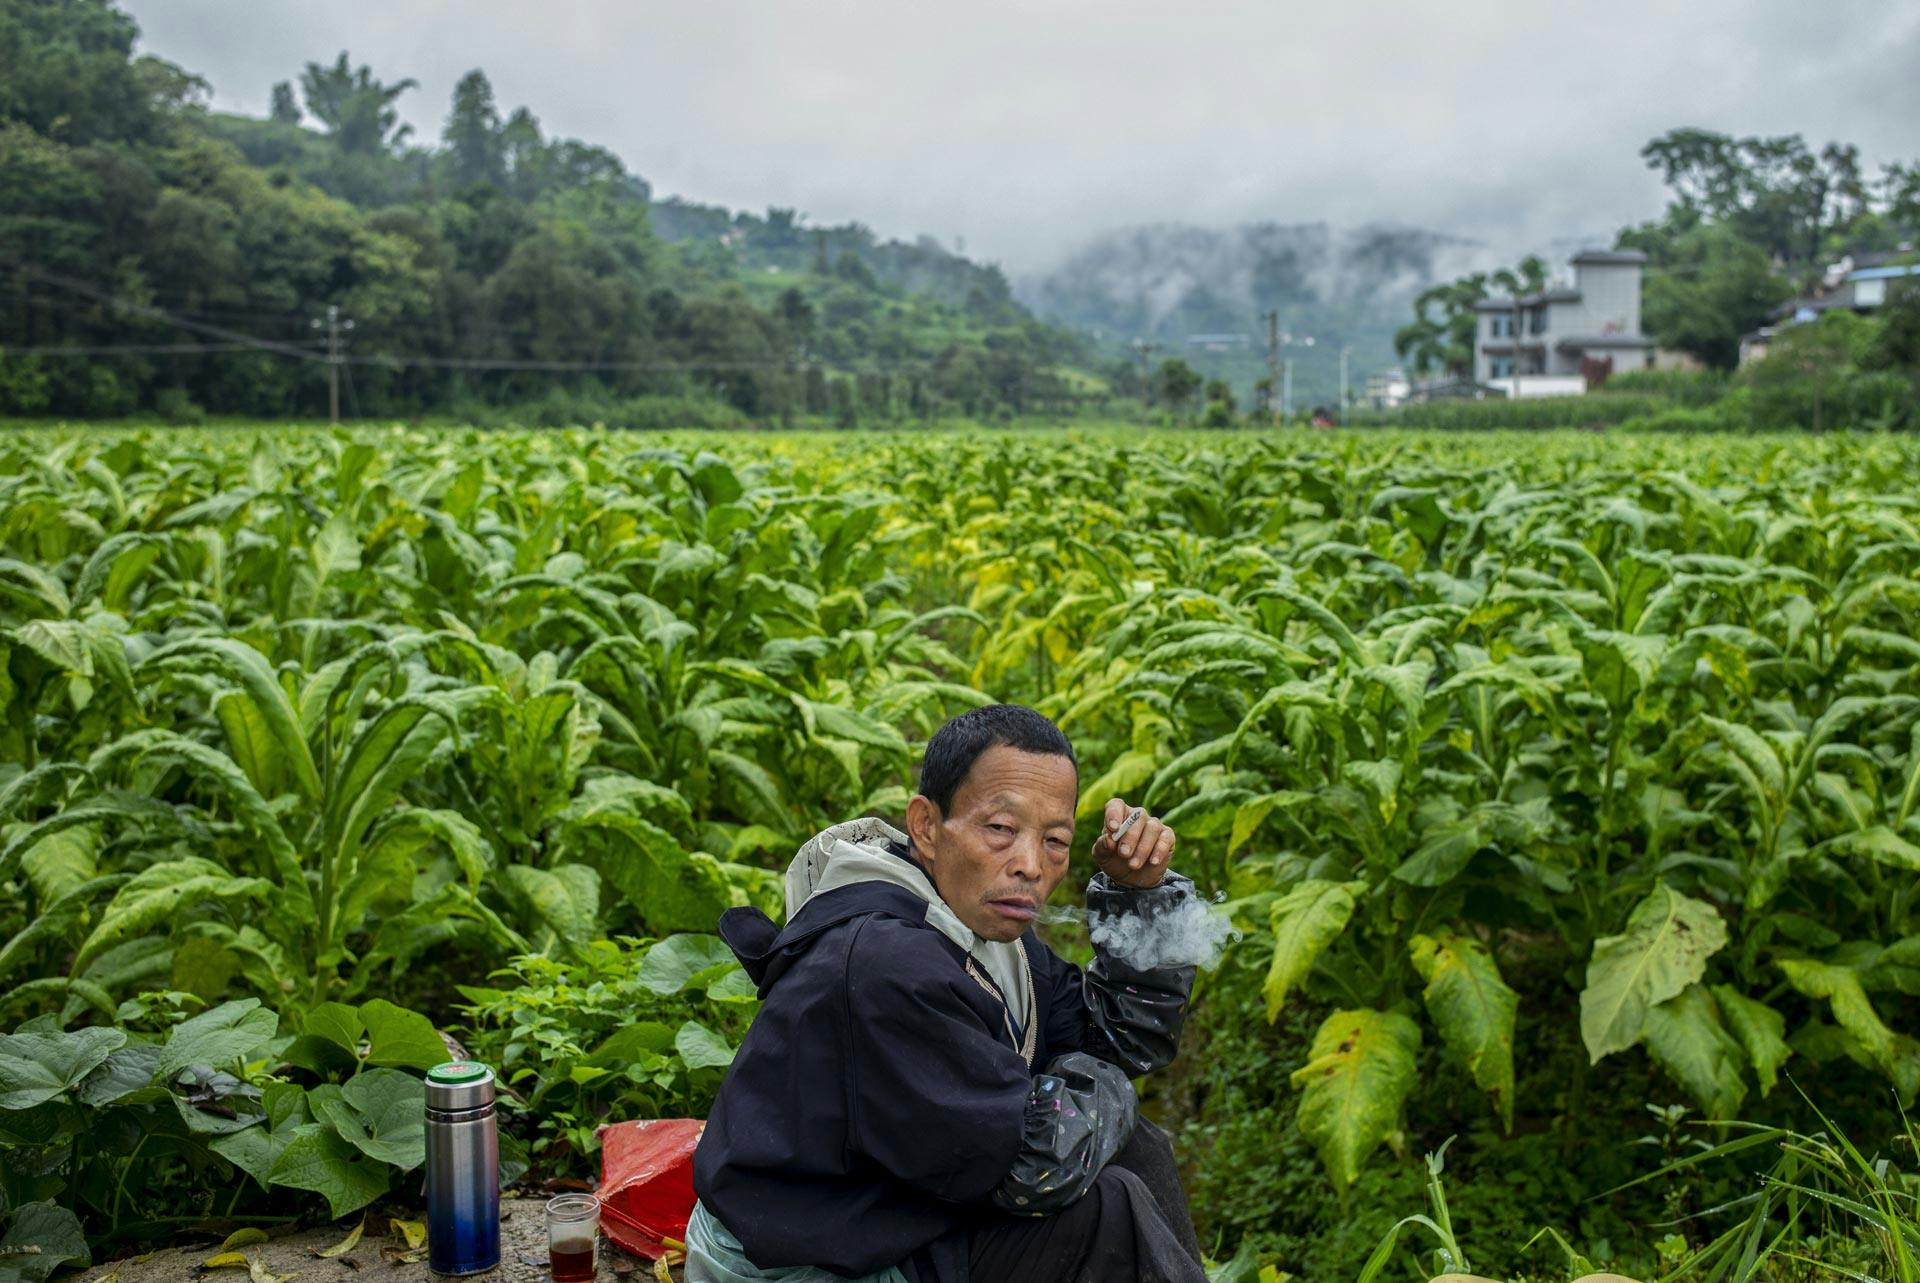 A tobacco farmer takes a cigarette break on the side of the road in a tobacco plantation in China's Yunnan Province.